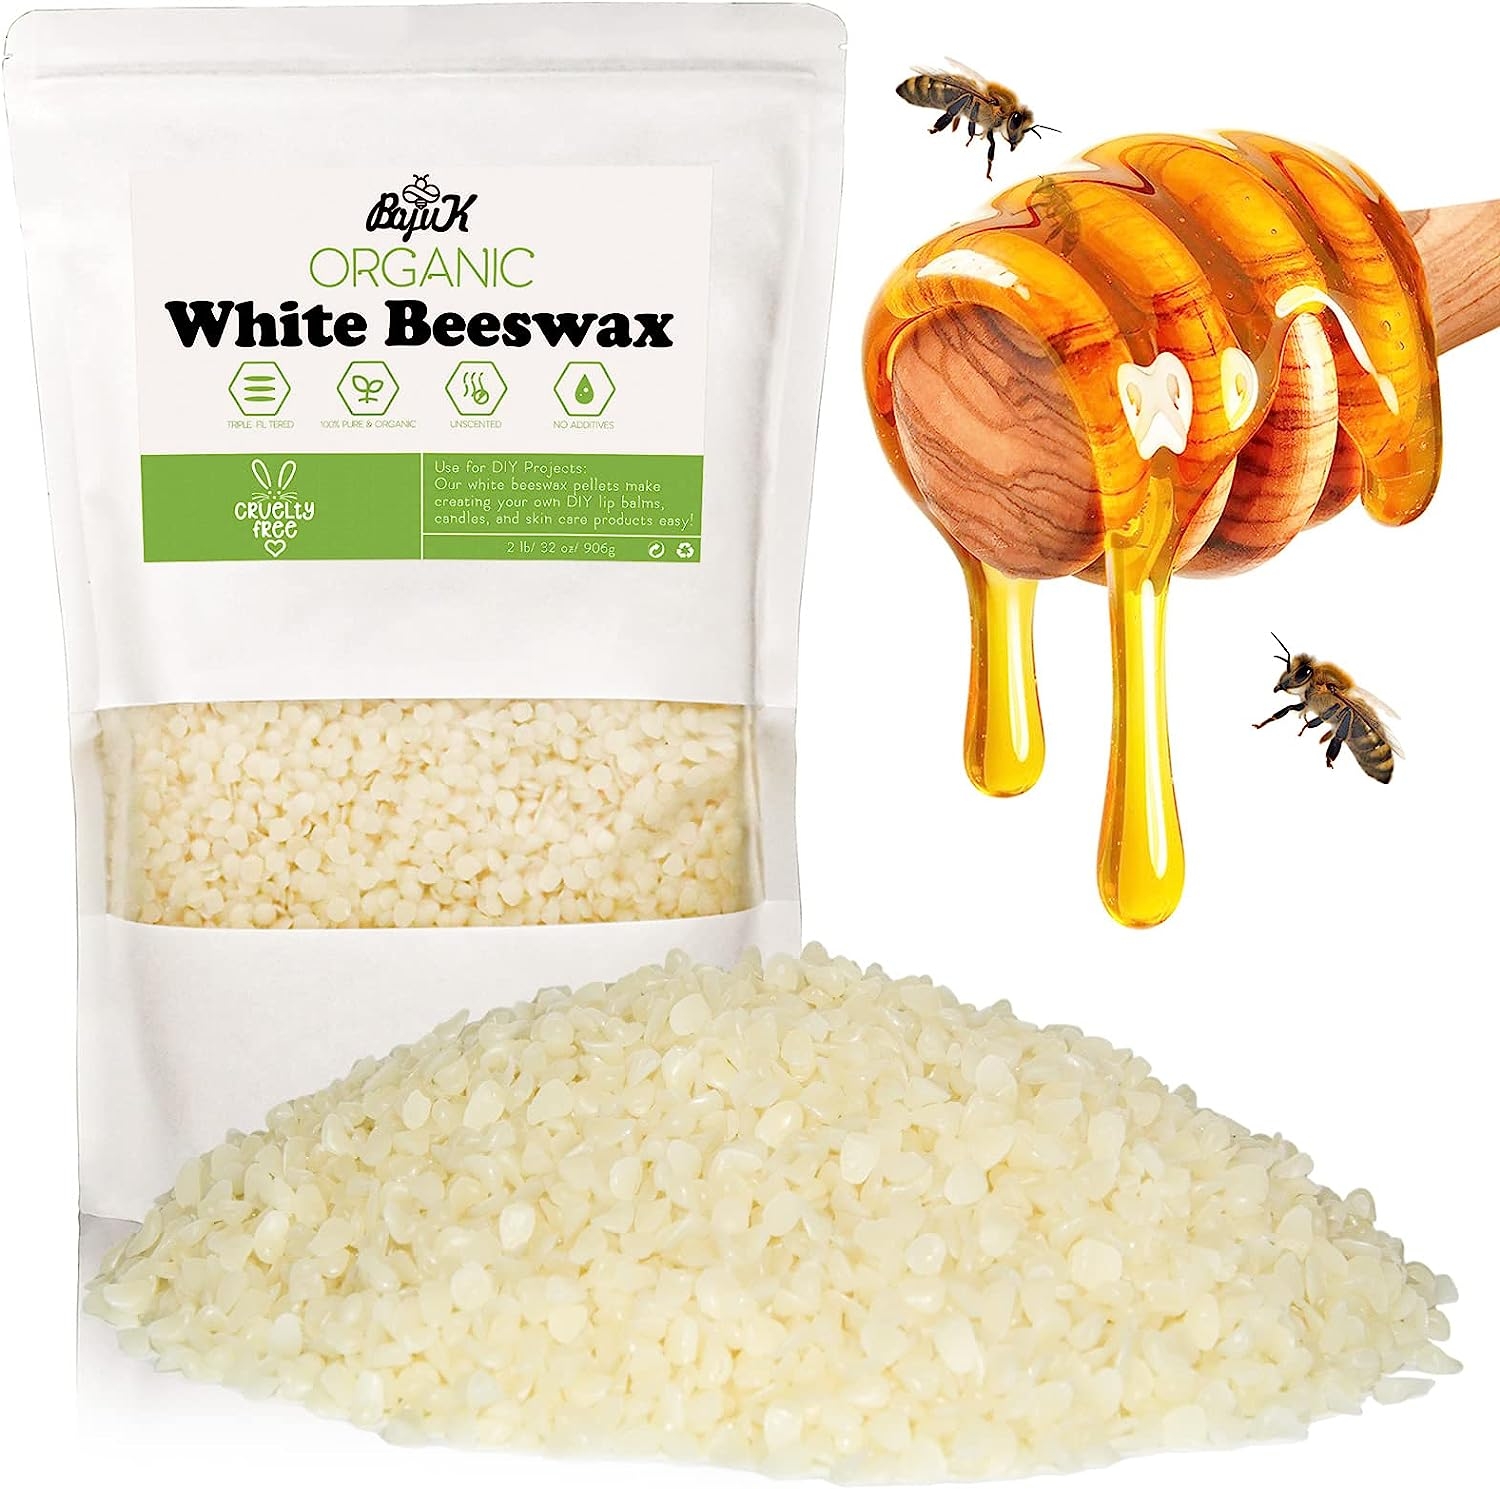 White Beeswax Pellets - 0.5Ib(200g) Beeswax for Candle Making - Beeswax  Pellets Cosmetic Grade Eco Friendly Products - Organic - The Bee Broker